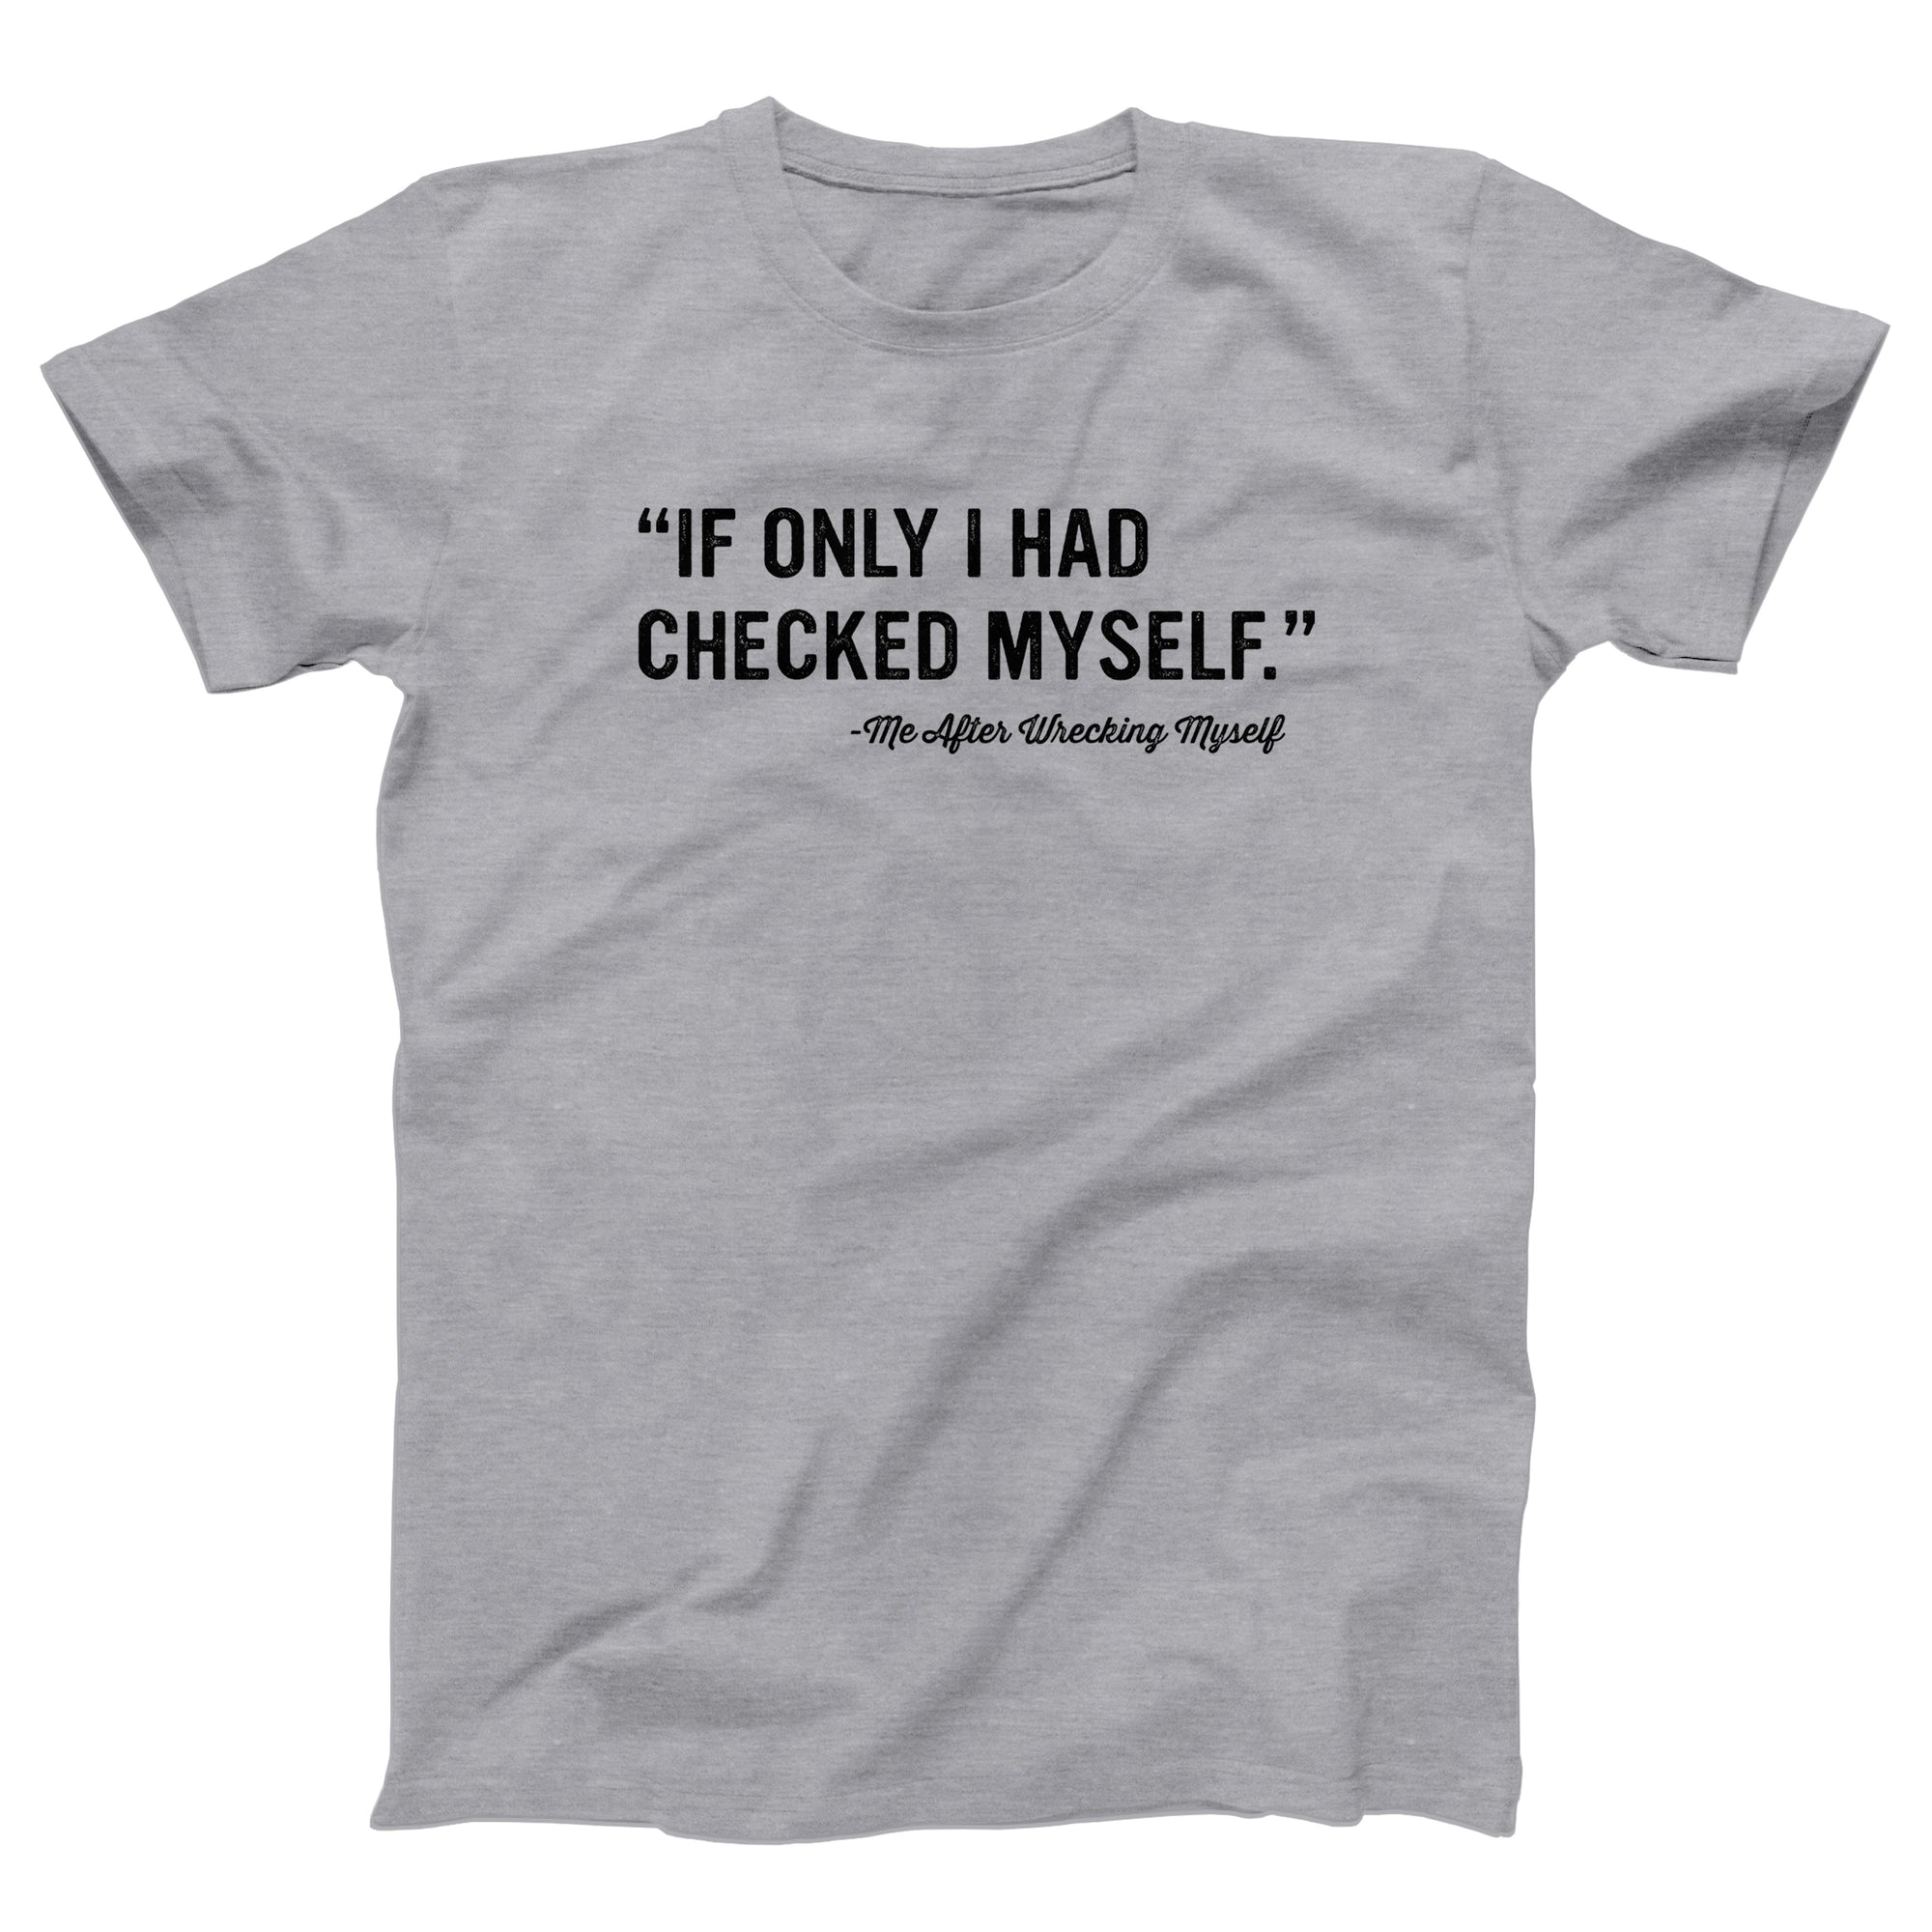 If Only I Had Checked Myself Adult Unisex T-Shirt - anishphilip